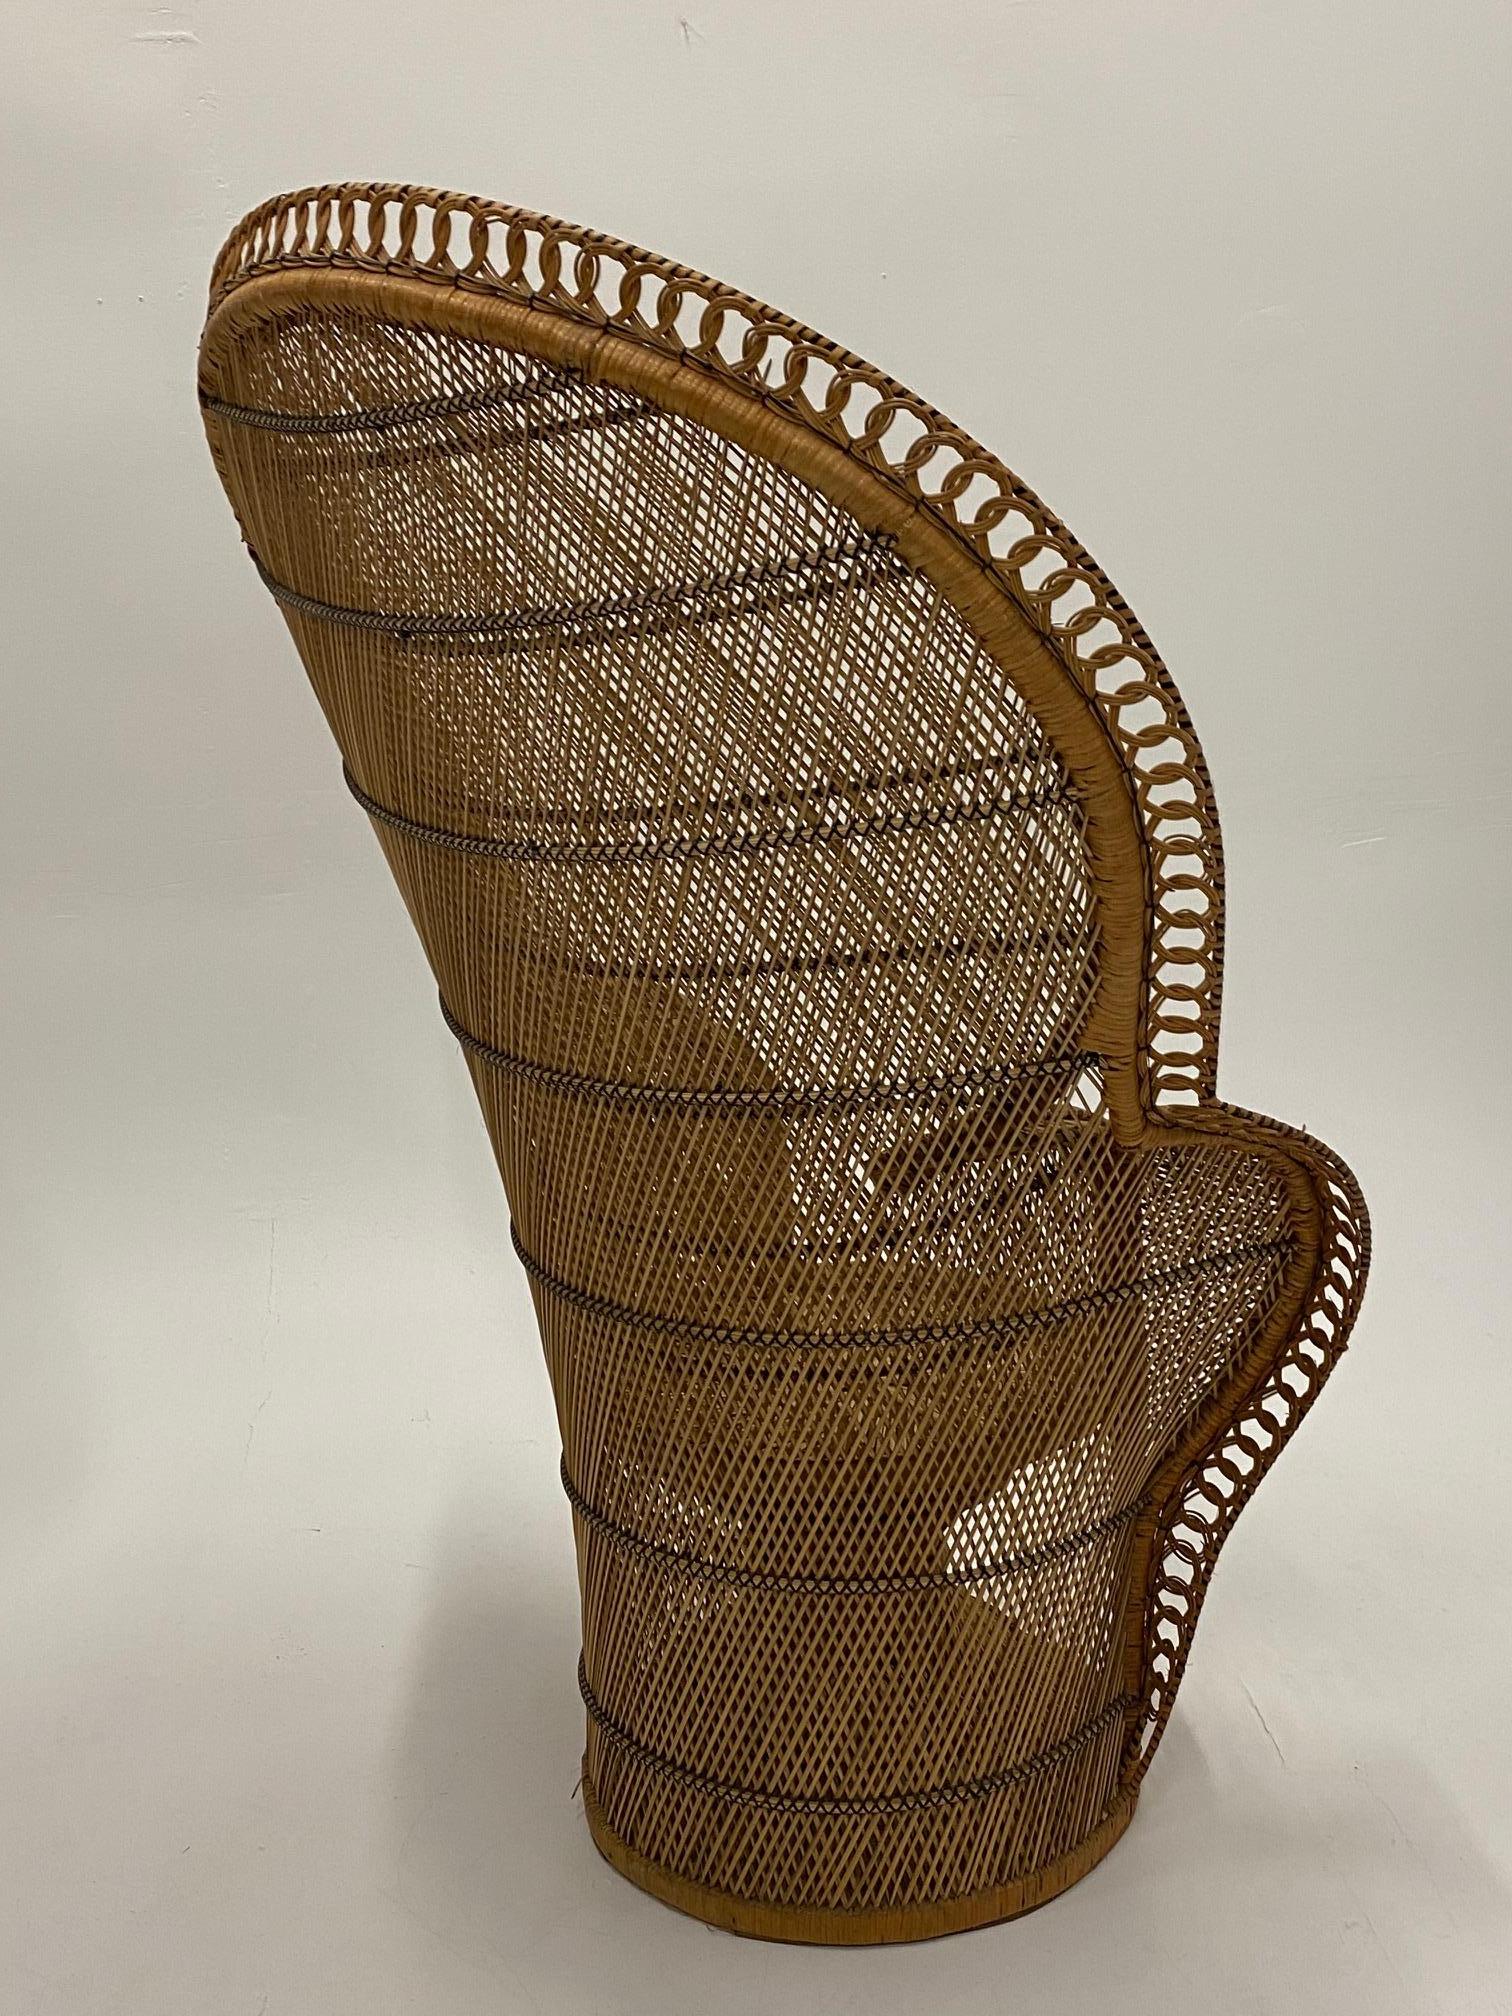 Incredibly Detailed Impressive in Scale Rattan Cobra Peacock Chair 4